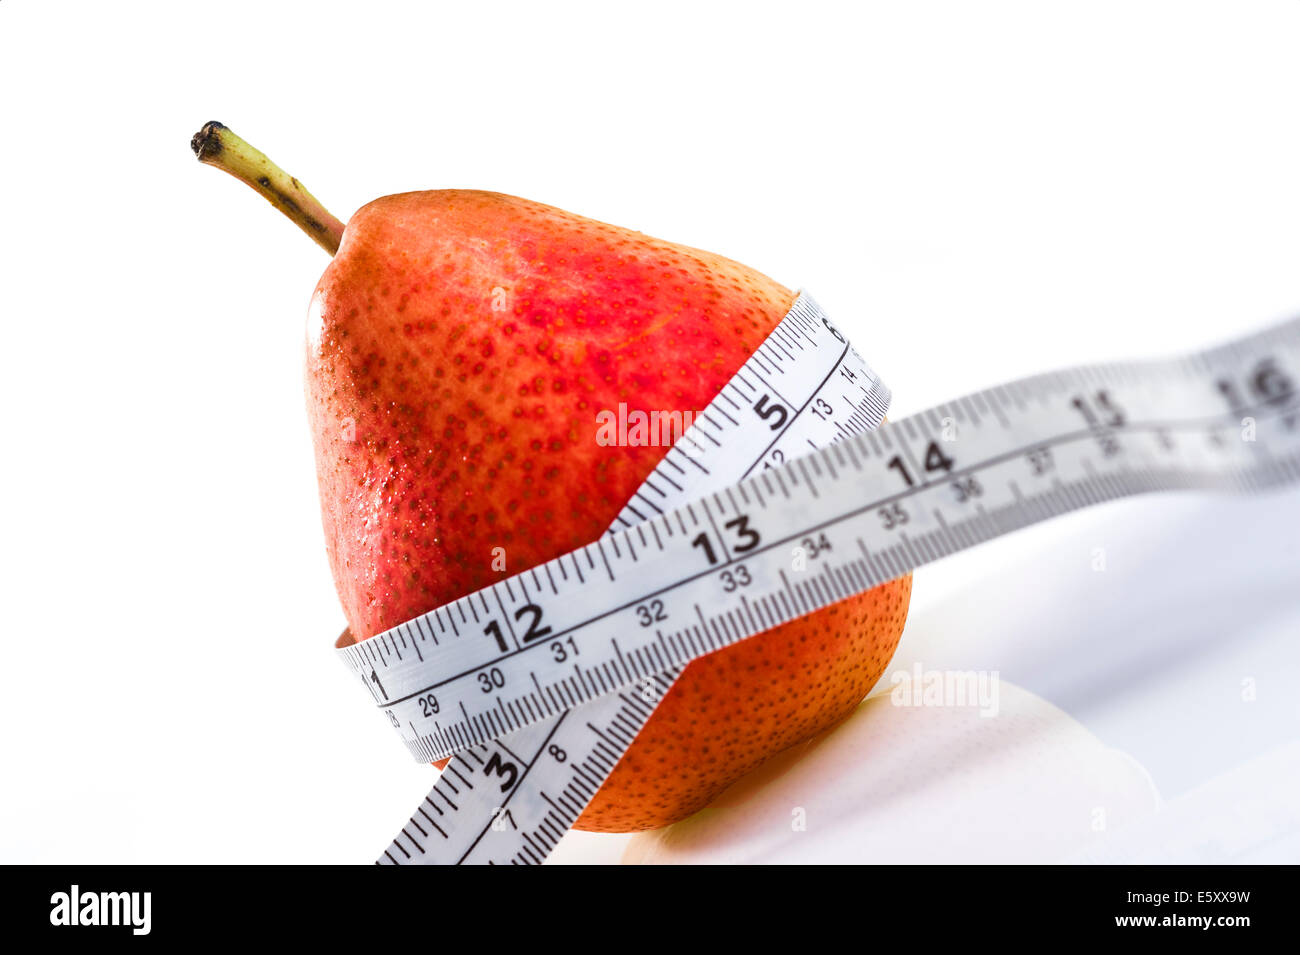 Red pear with tape measure.obesity, weight loss, dieting. Stock Photo